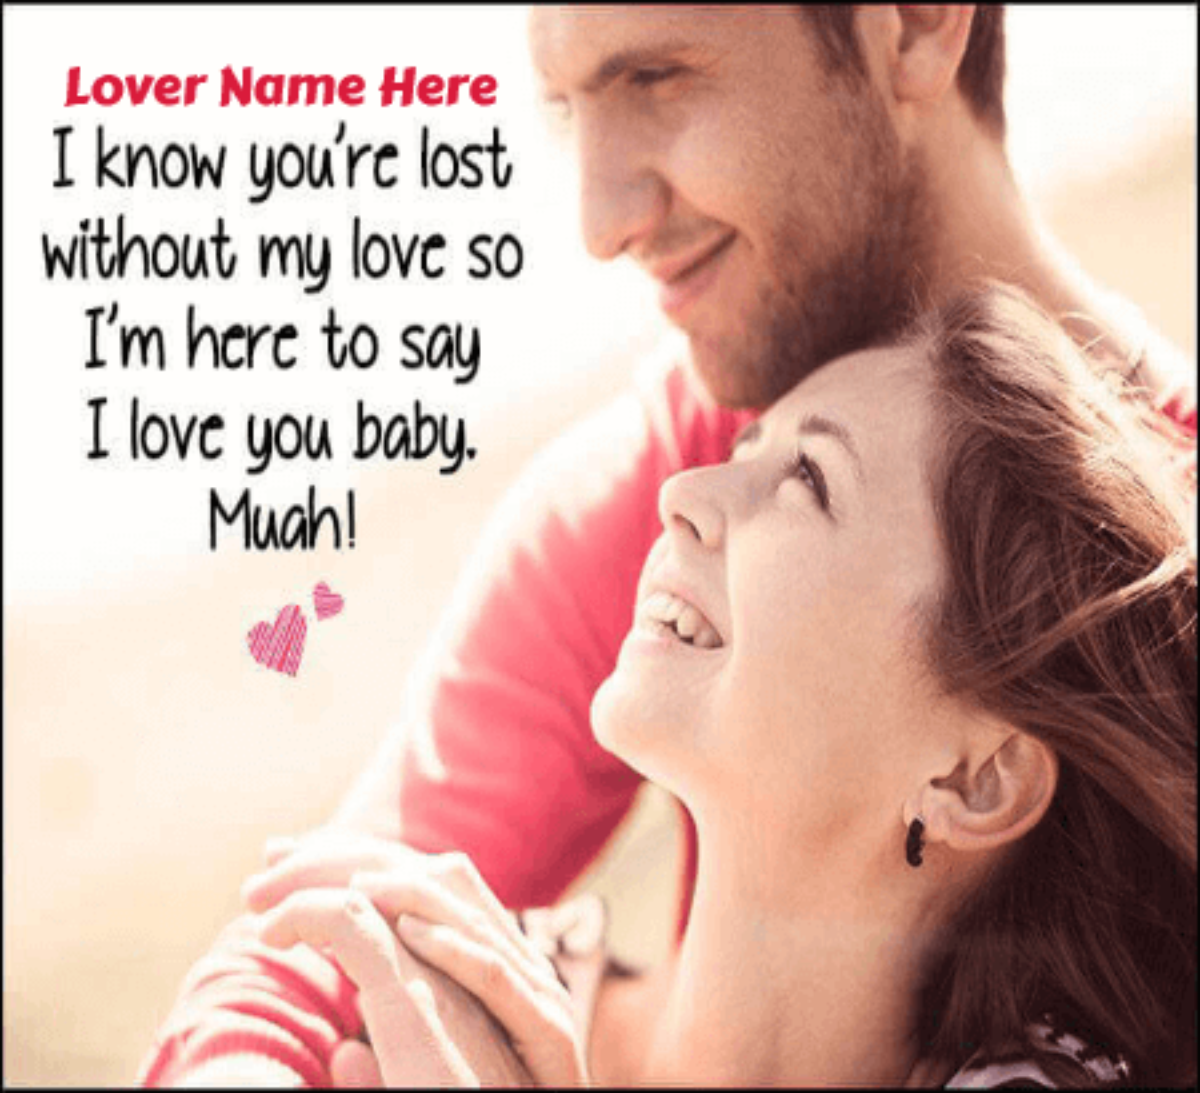 Good Morning My Love - Good Morning Wishes With Name